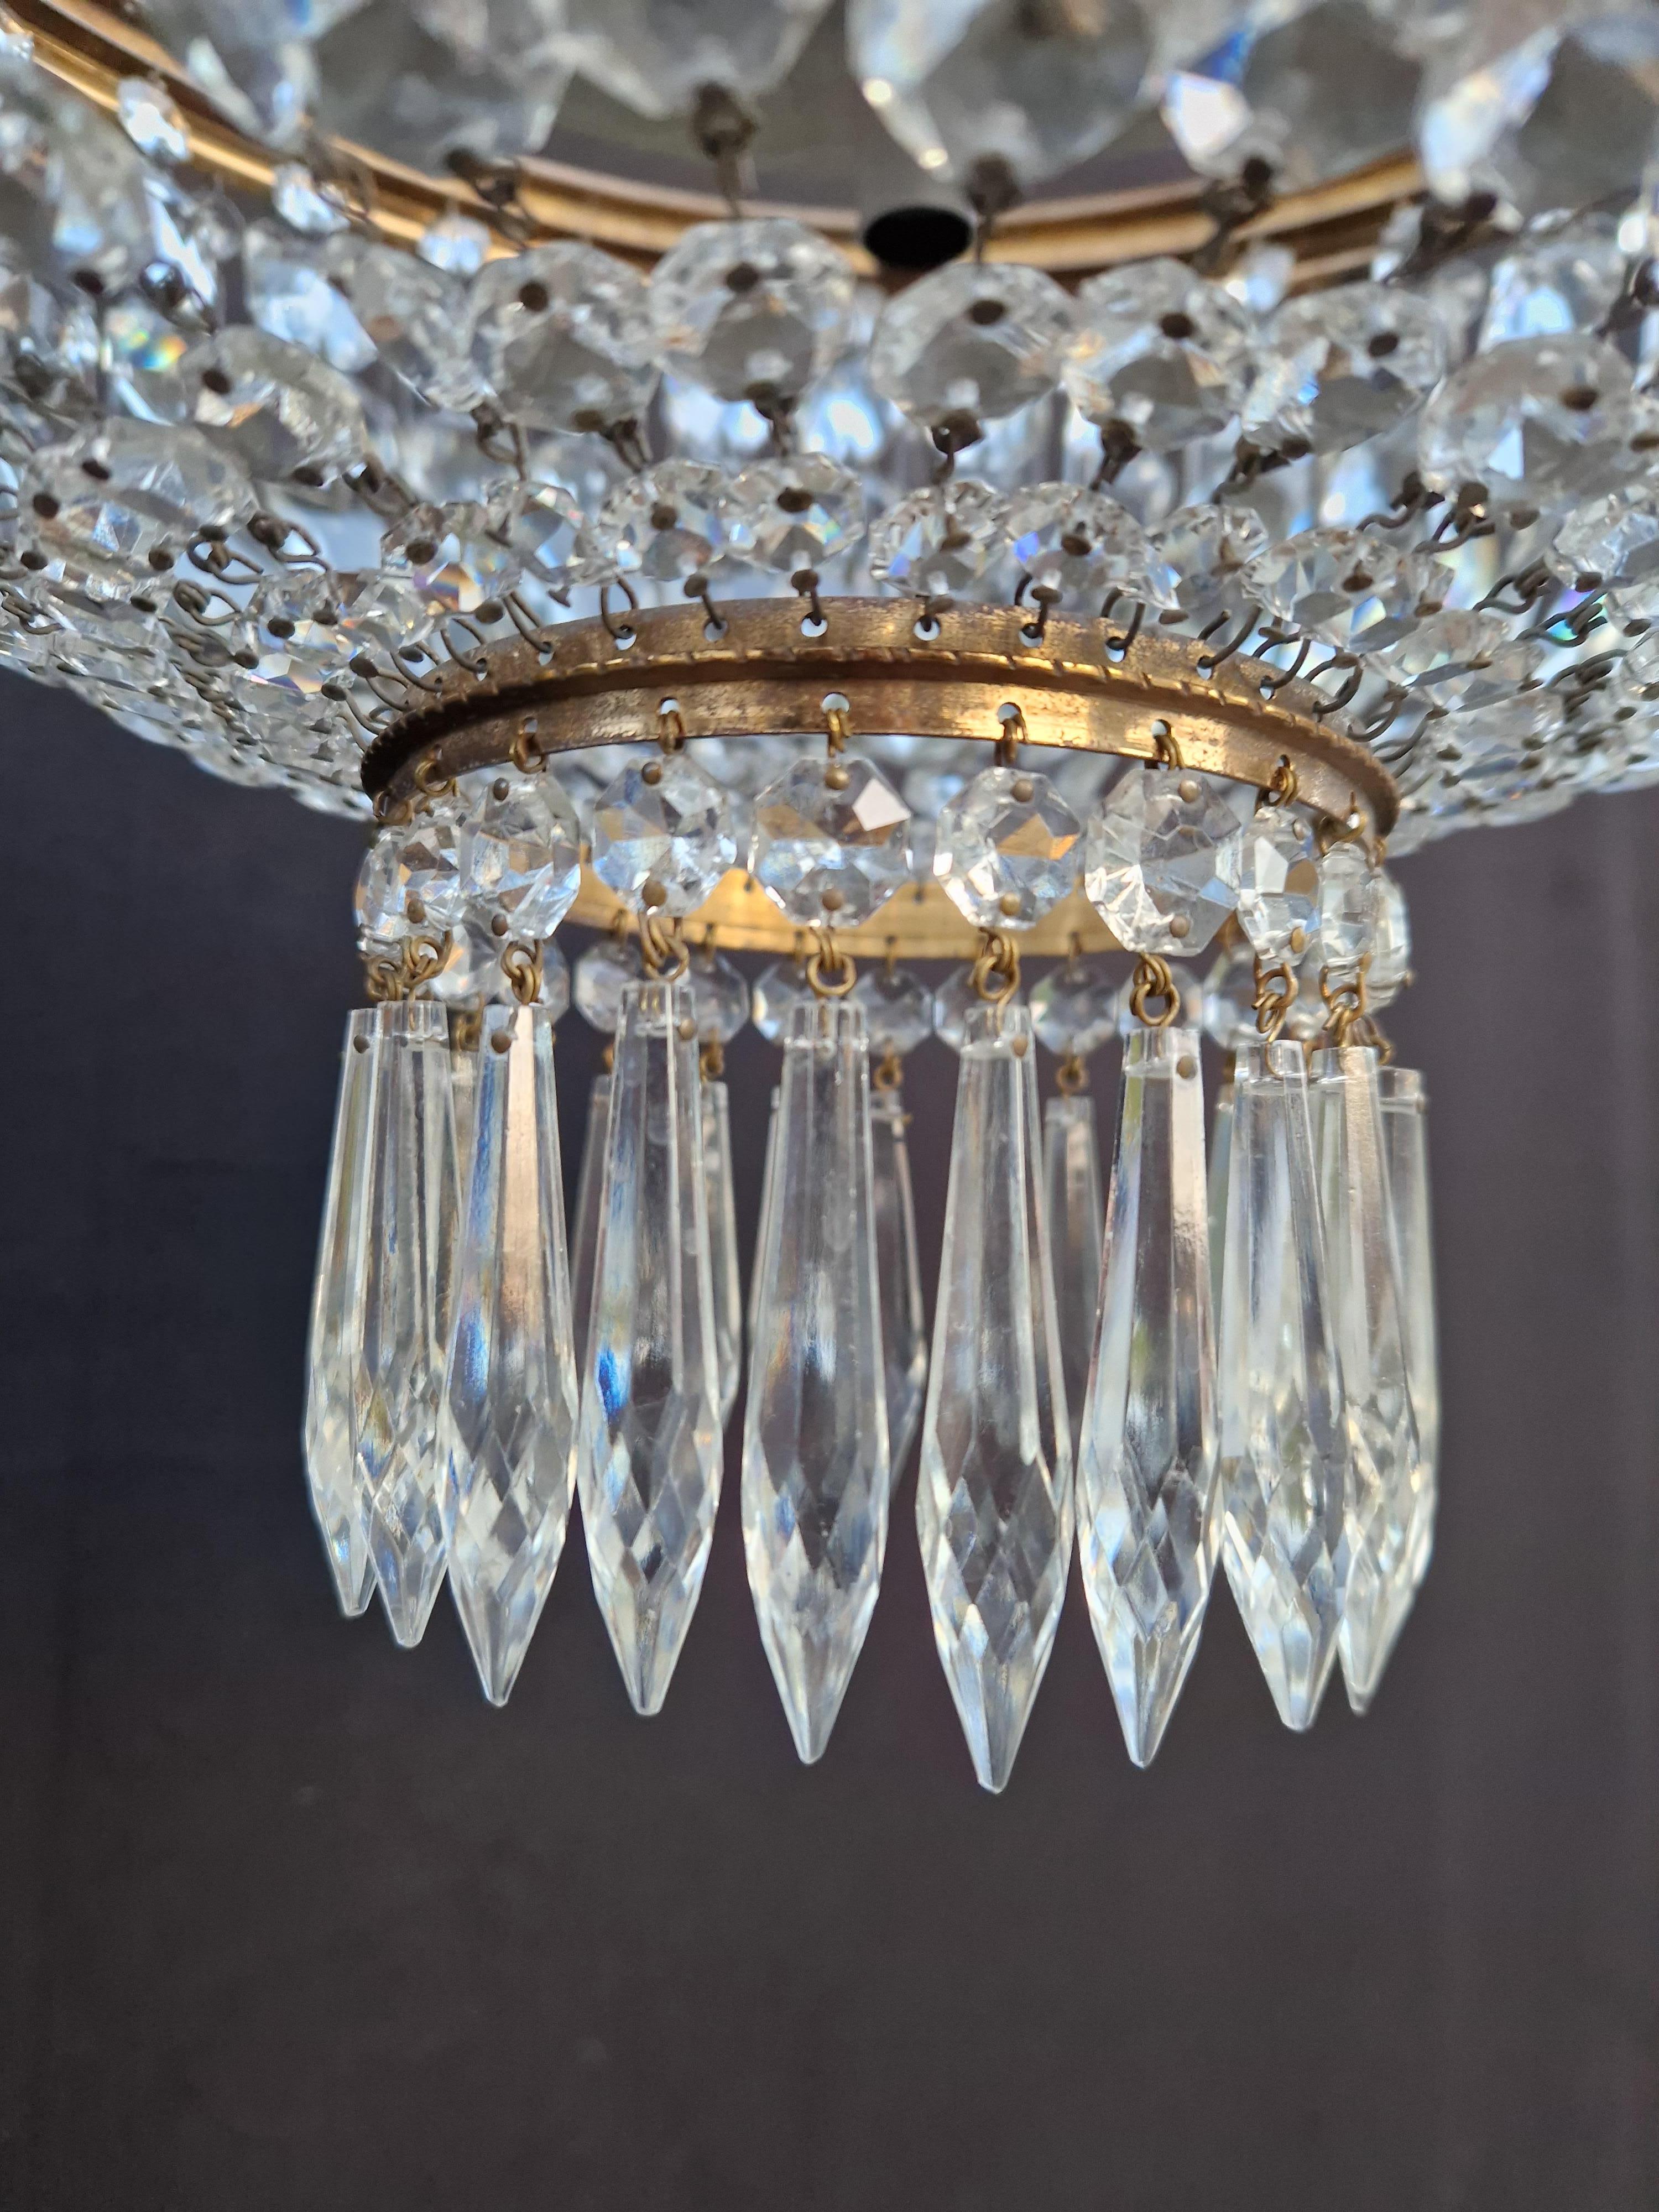 Introducing our beloved old chandelier, tenderly and professionally restored in Berlin. Its electrical wiring is fully compatible with the US, as it has been re-wired and is ready to hang. Not a single crystal is missing, and each one has been